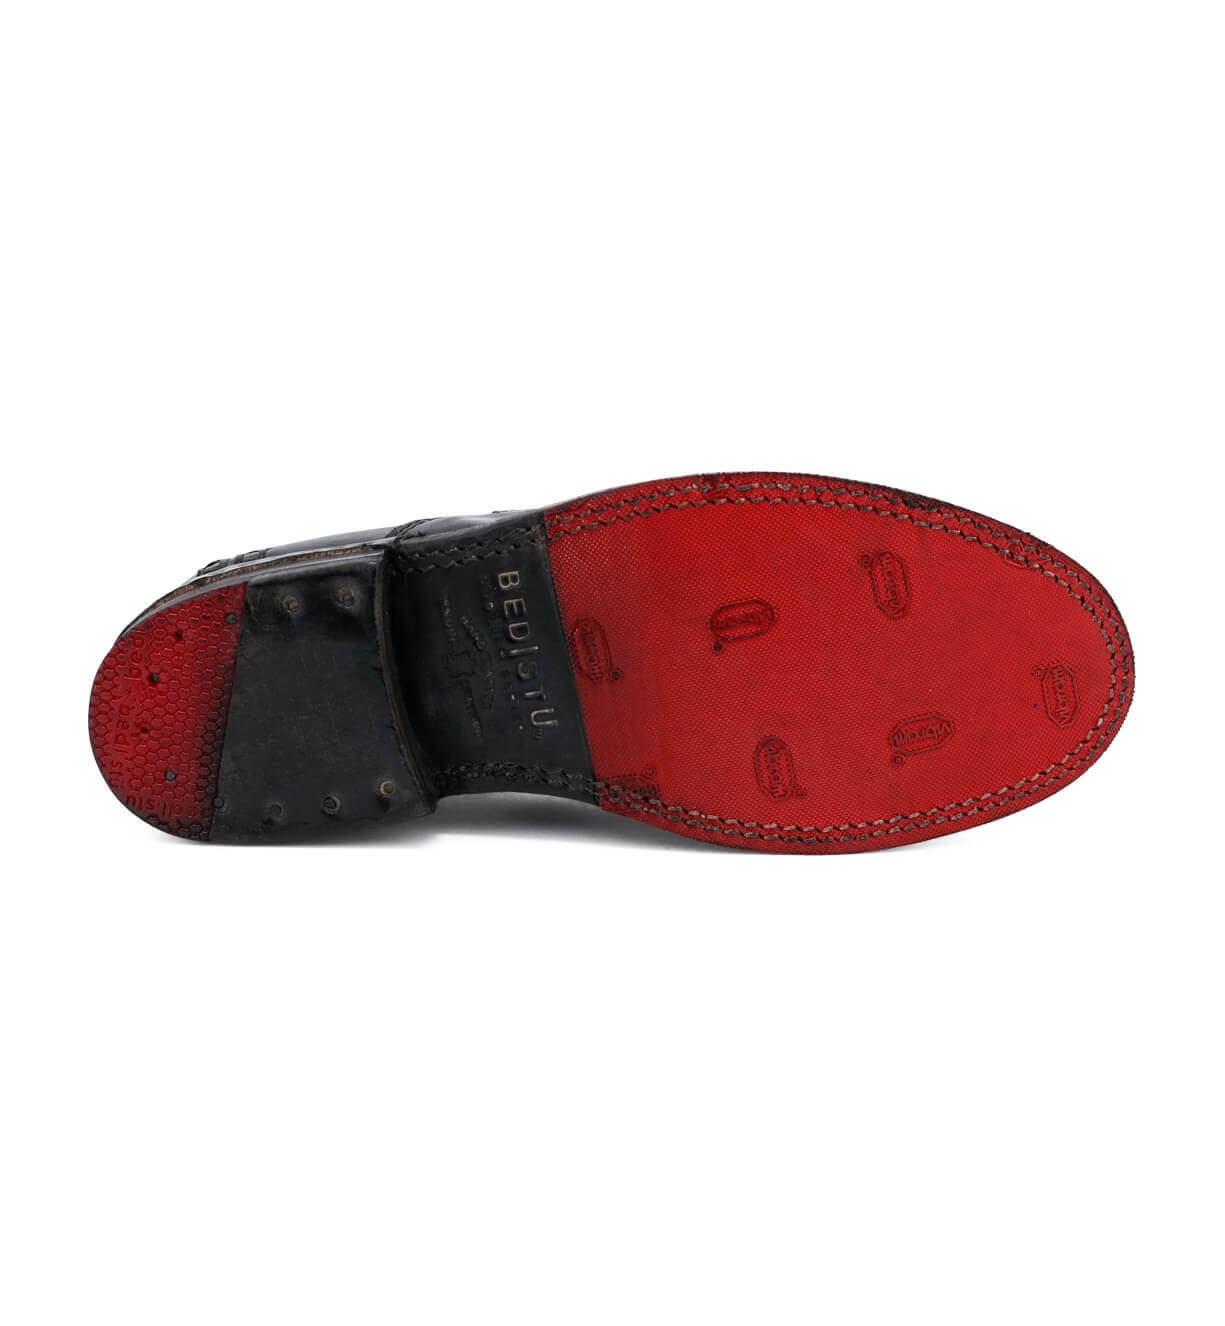 A pair of black and red Rose shoes with studs on the sole by Bed Stu.